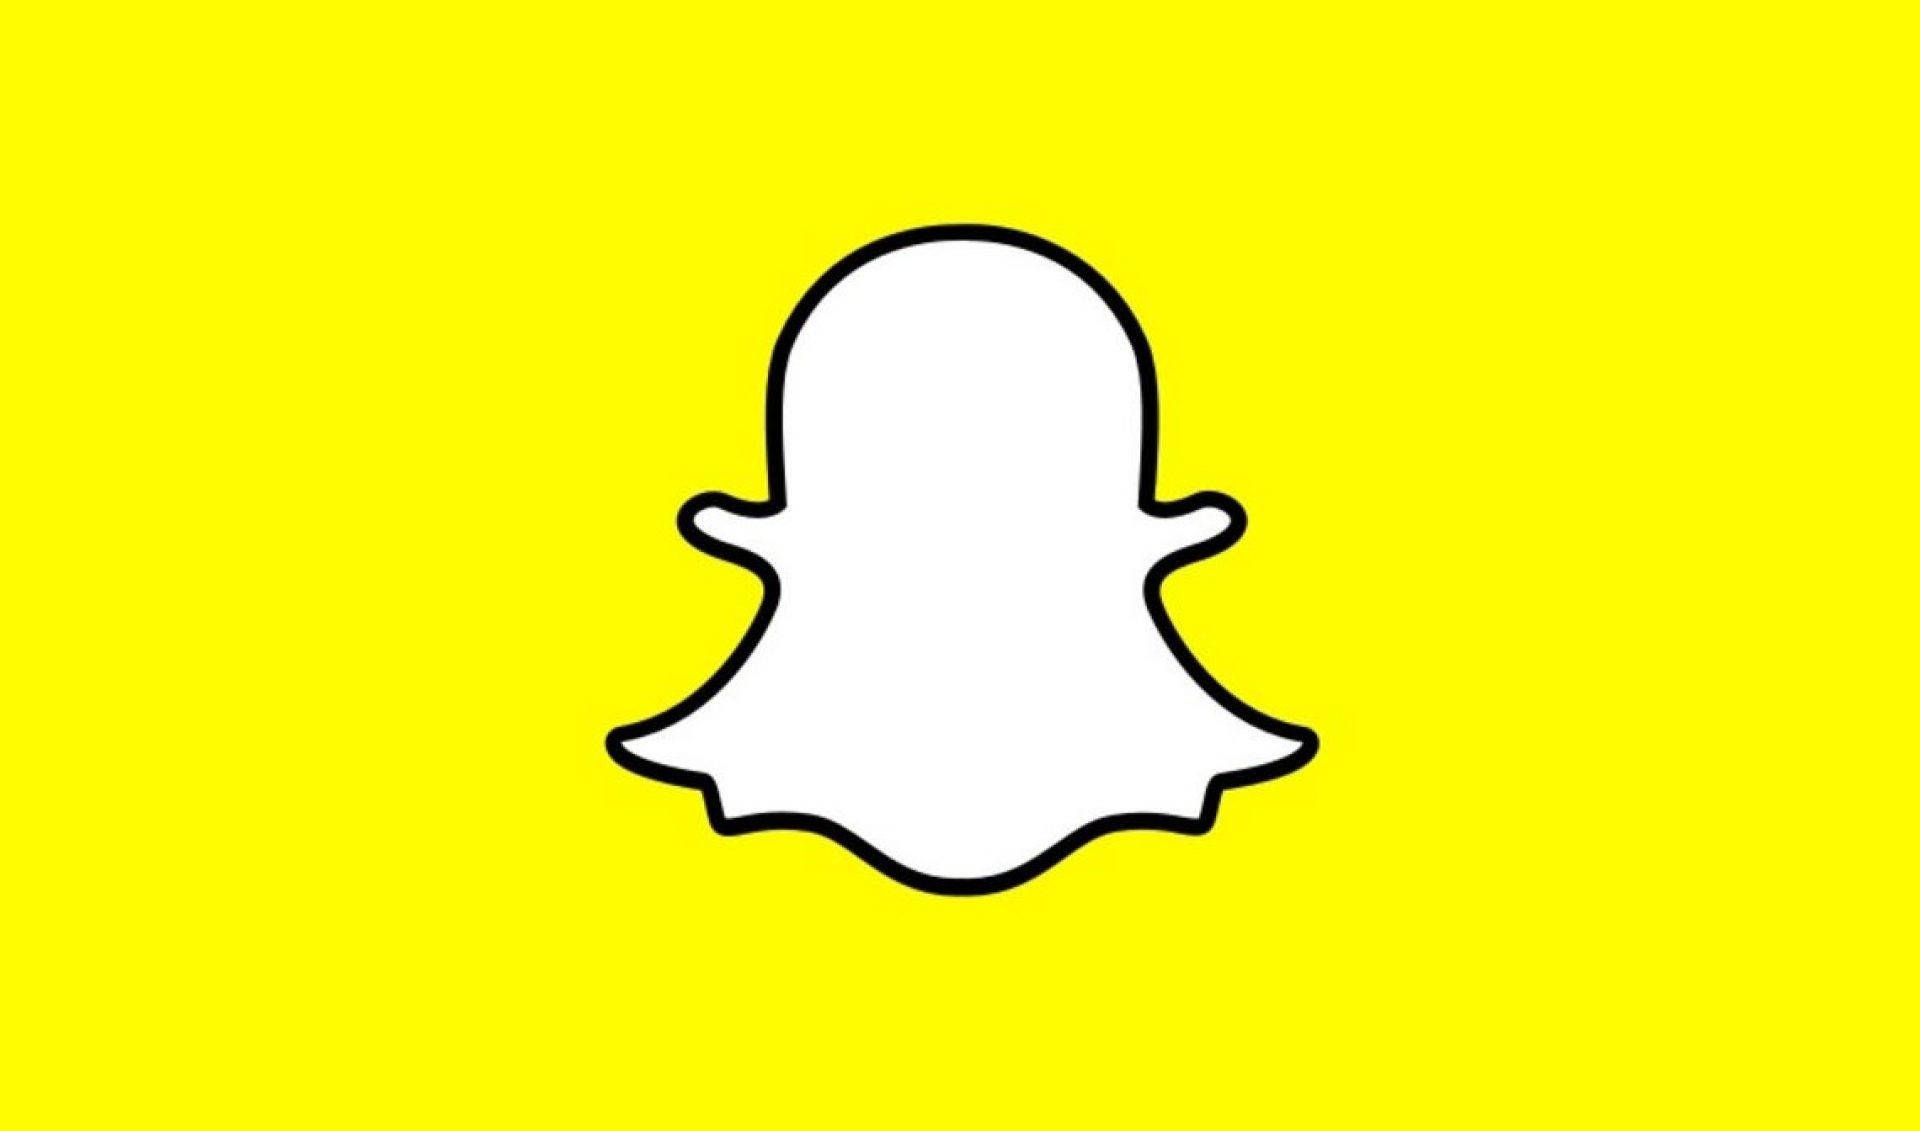 New ‘Memories’ Update Will Let Snapchatters Archive, Edit, And Share Old Stories And Snaps